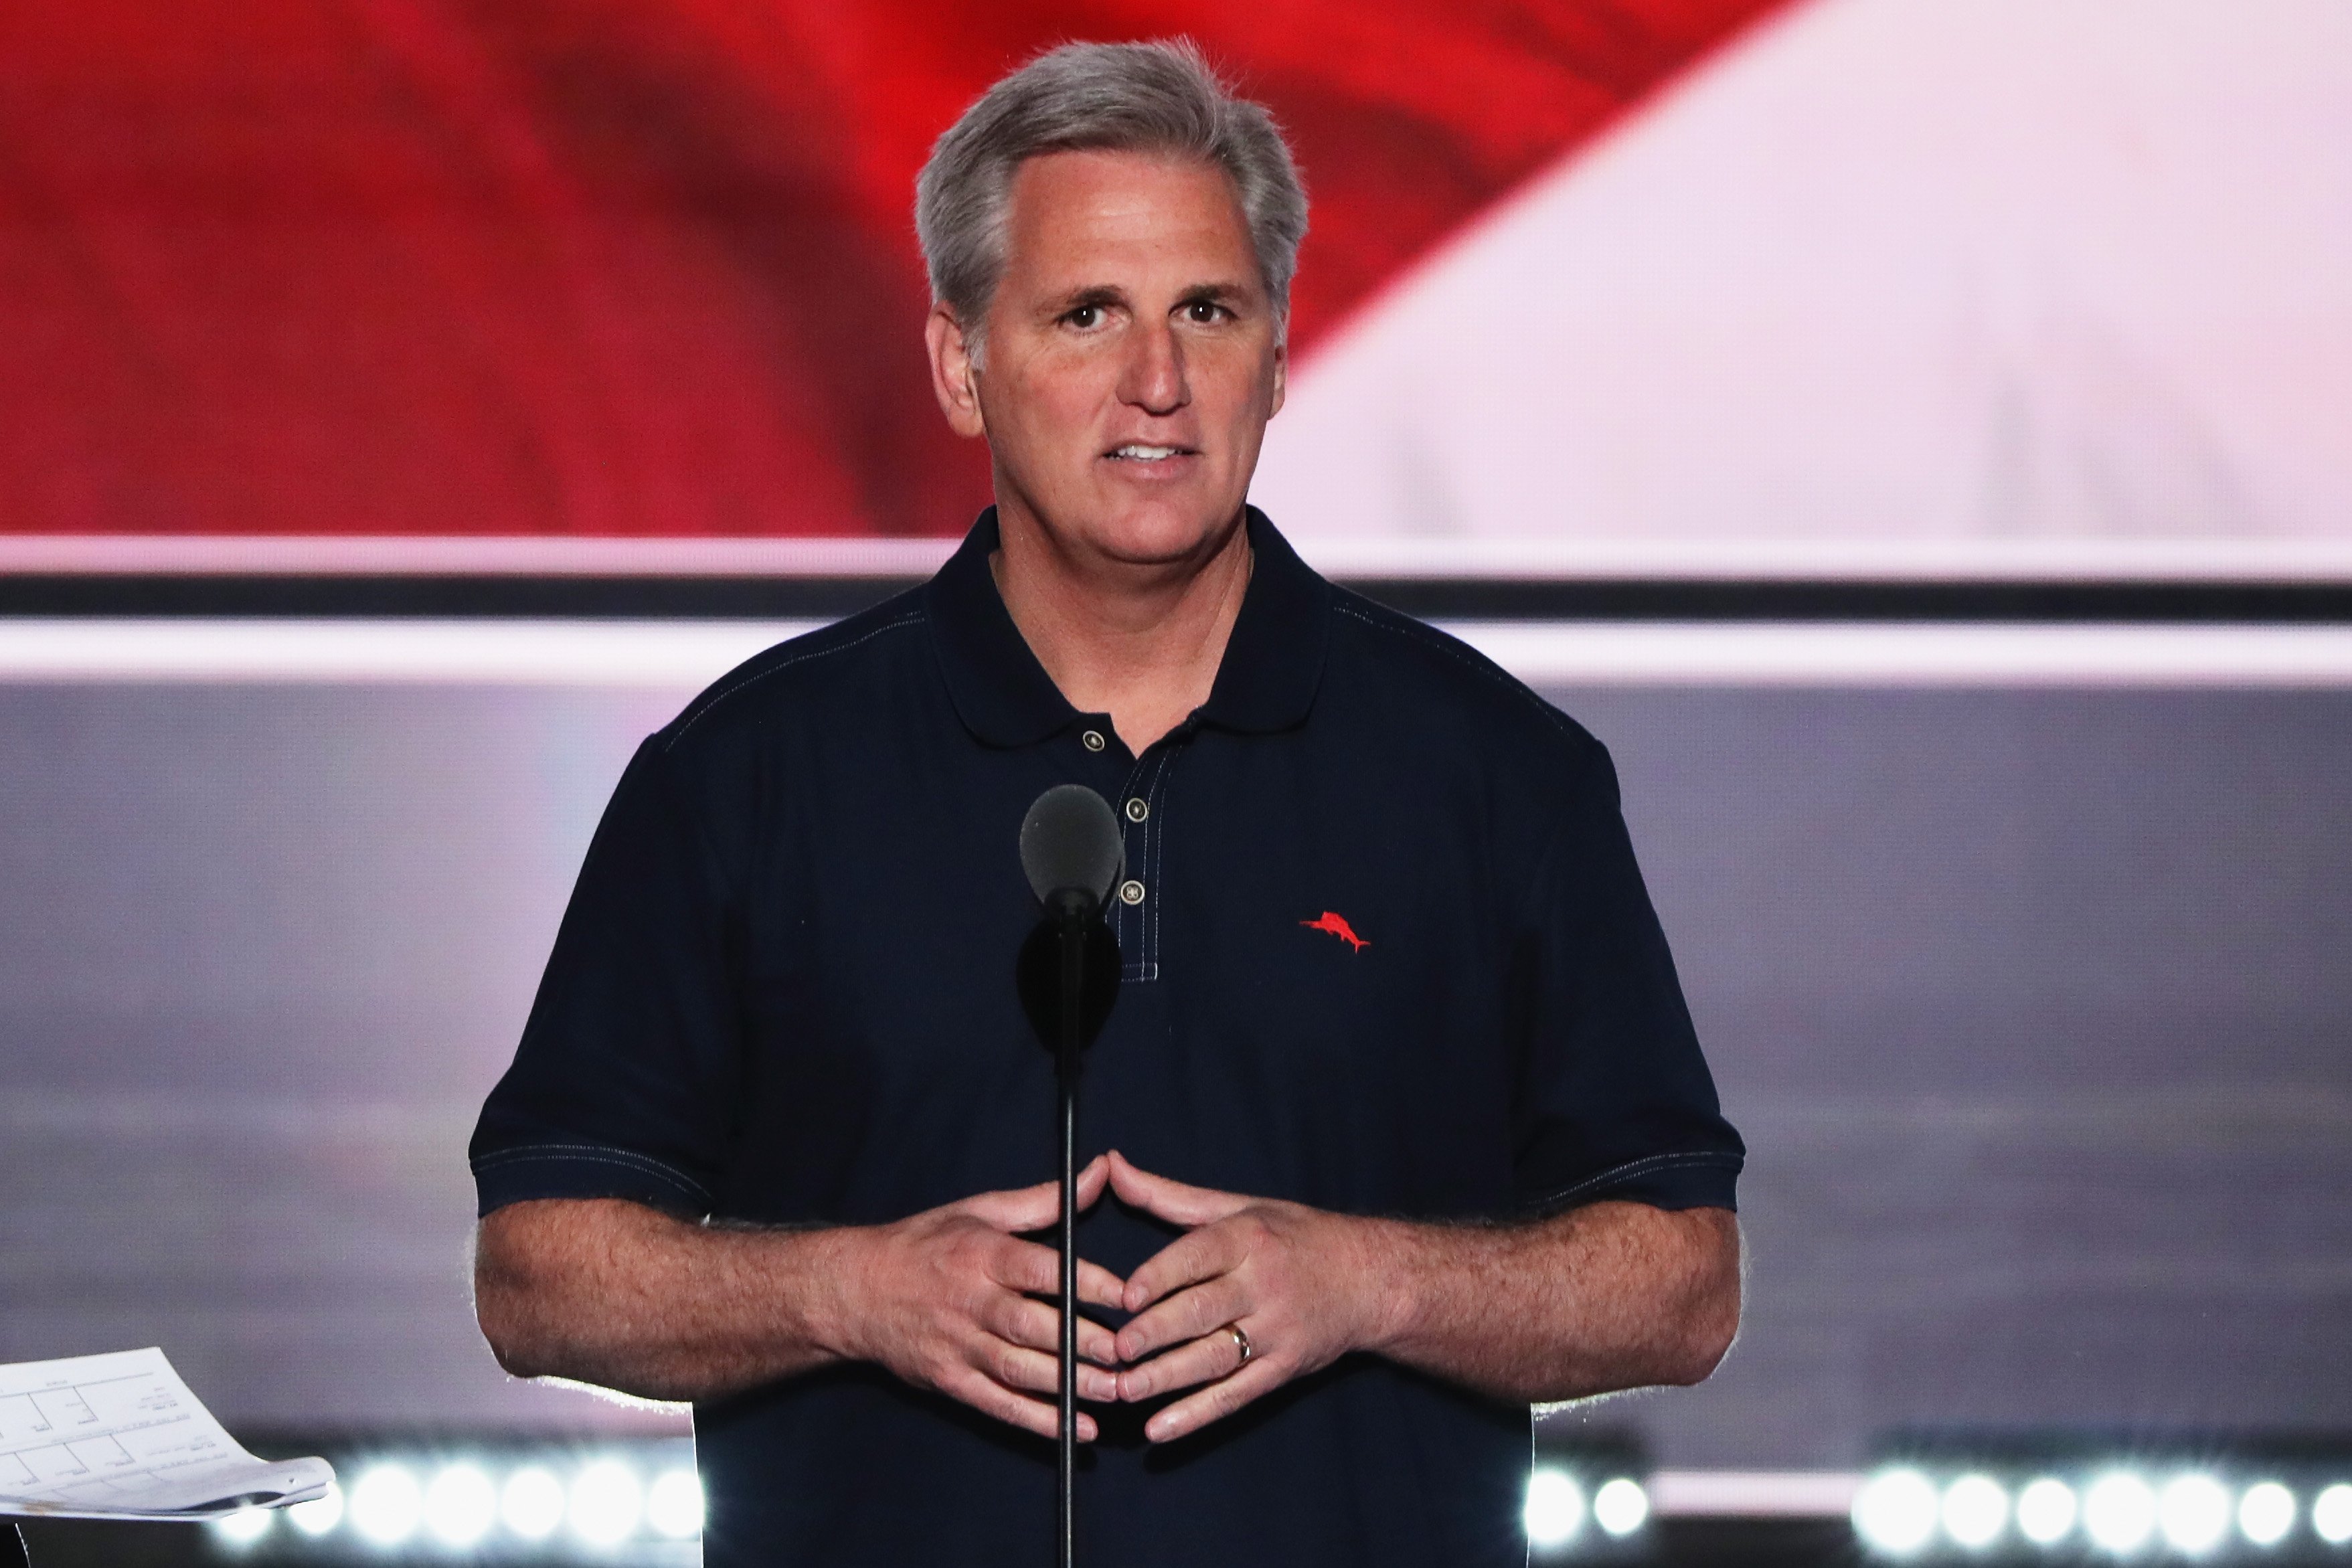 House Majority Leader Rep. Kevin McCarthy stands on stage prior to the start of the second day of the Republican National Convention on July 19, 2016 at the Quicken Loans Arena in Cleveland. (Alex Wong—Getty Images)